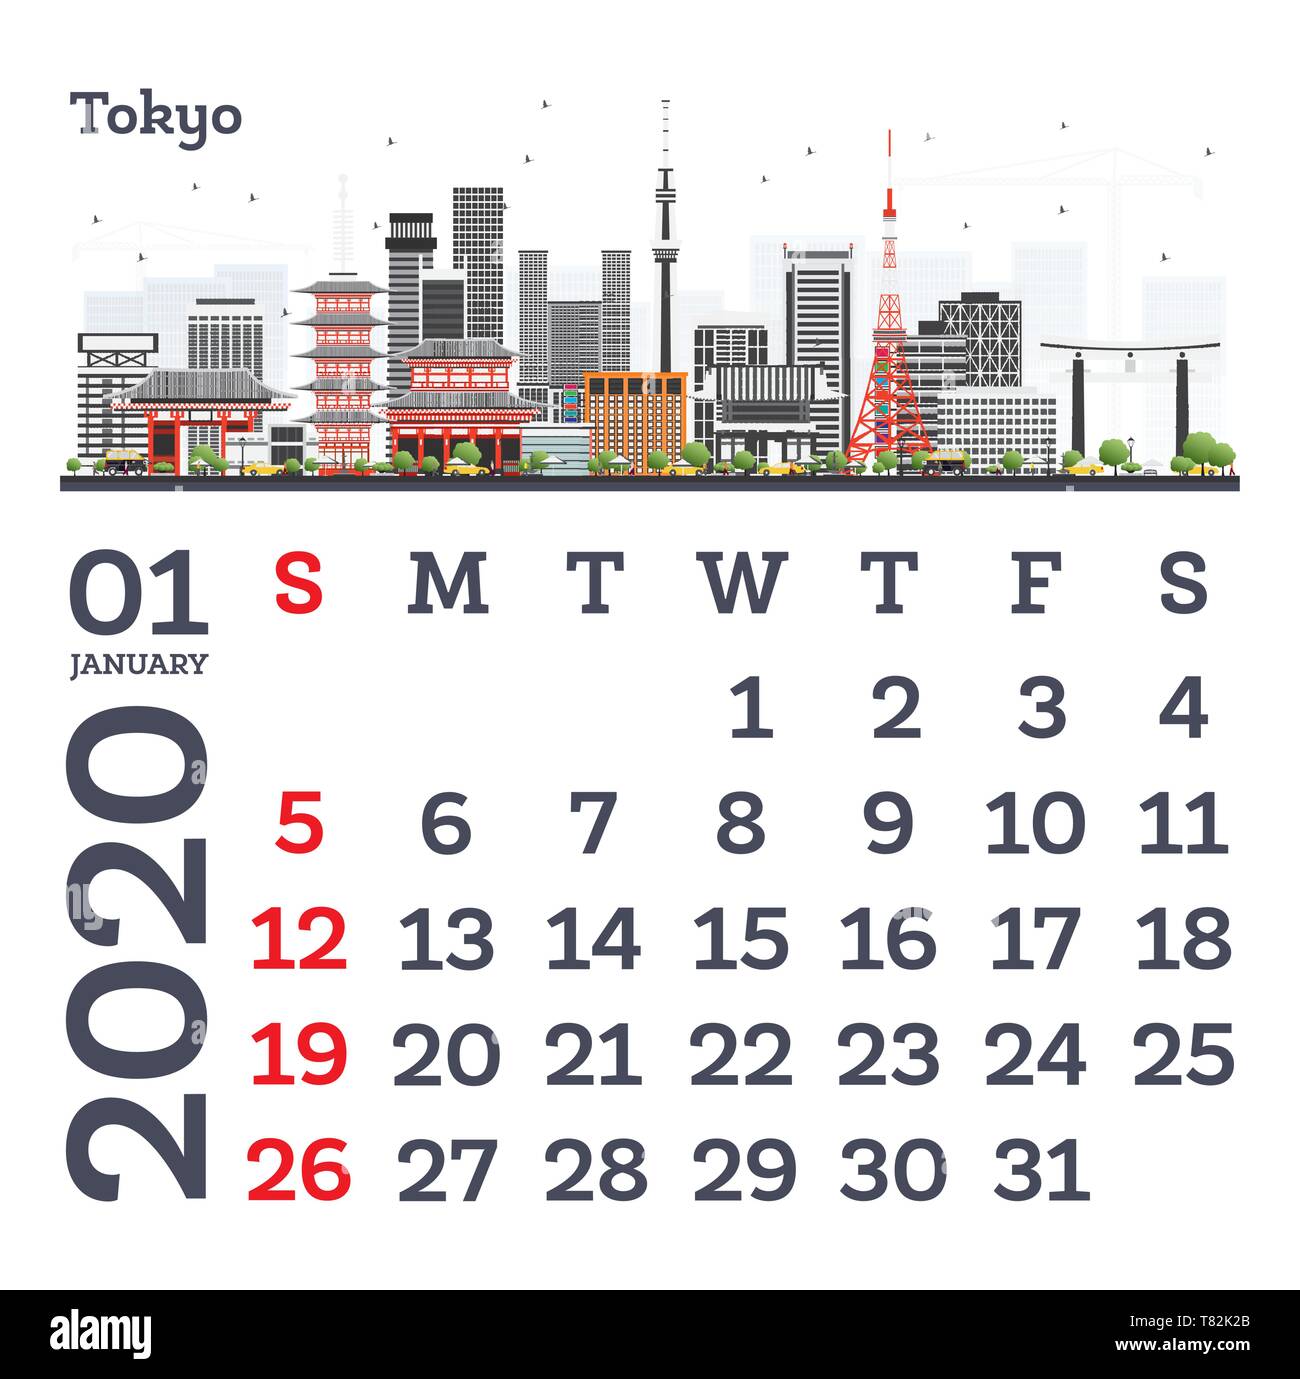 January 2020 Calendar Template with Tokyo City Skyline. Vector Illustration. Template for Print. Week starts from Sunday. Stock Vector